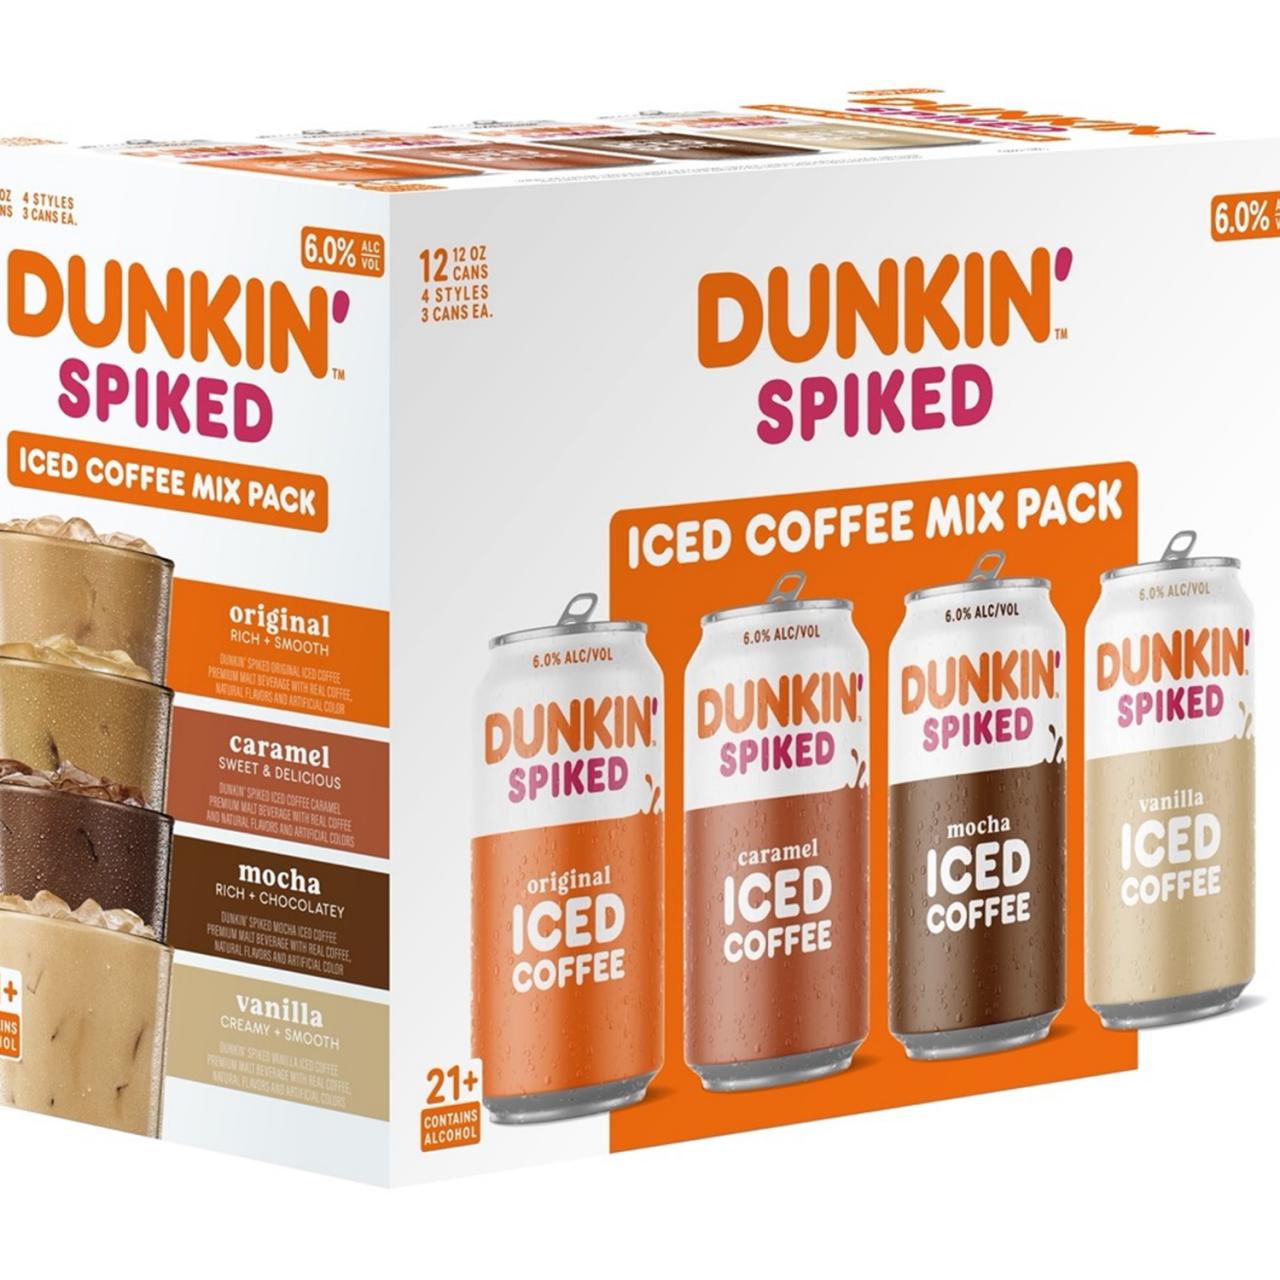 J.CO Donuts & Coffee Now Offers Bottled Iced Beverages